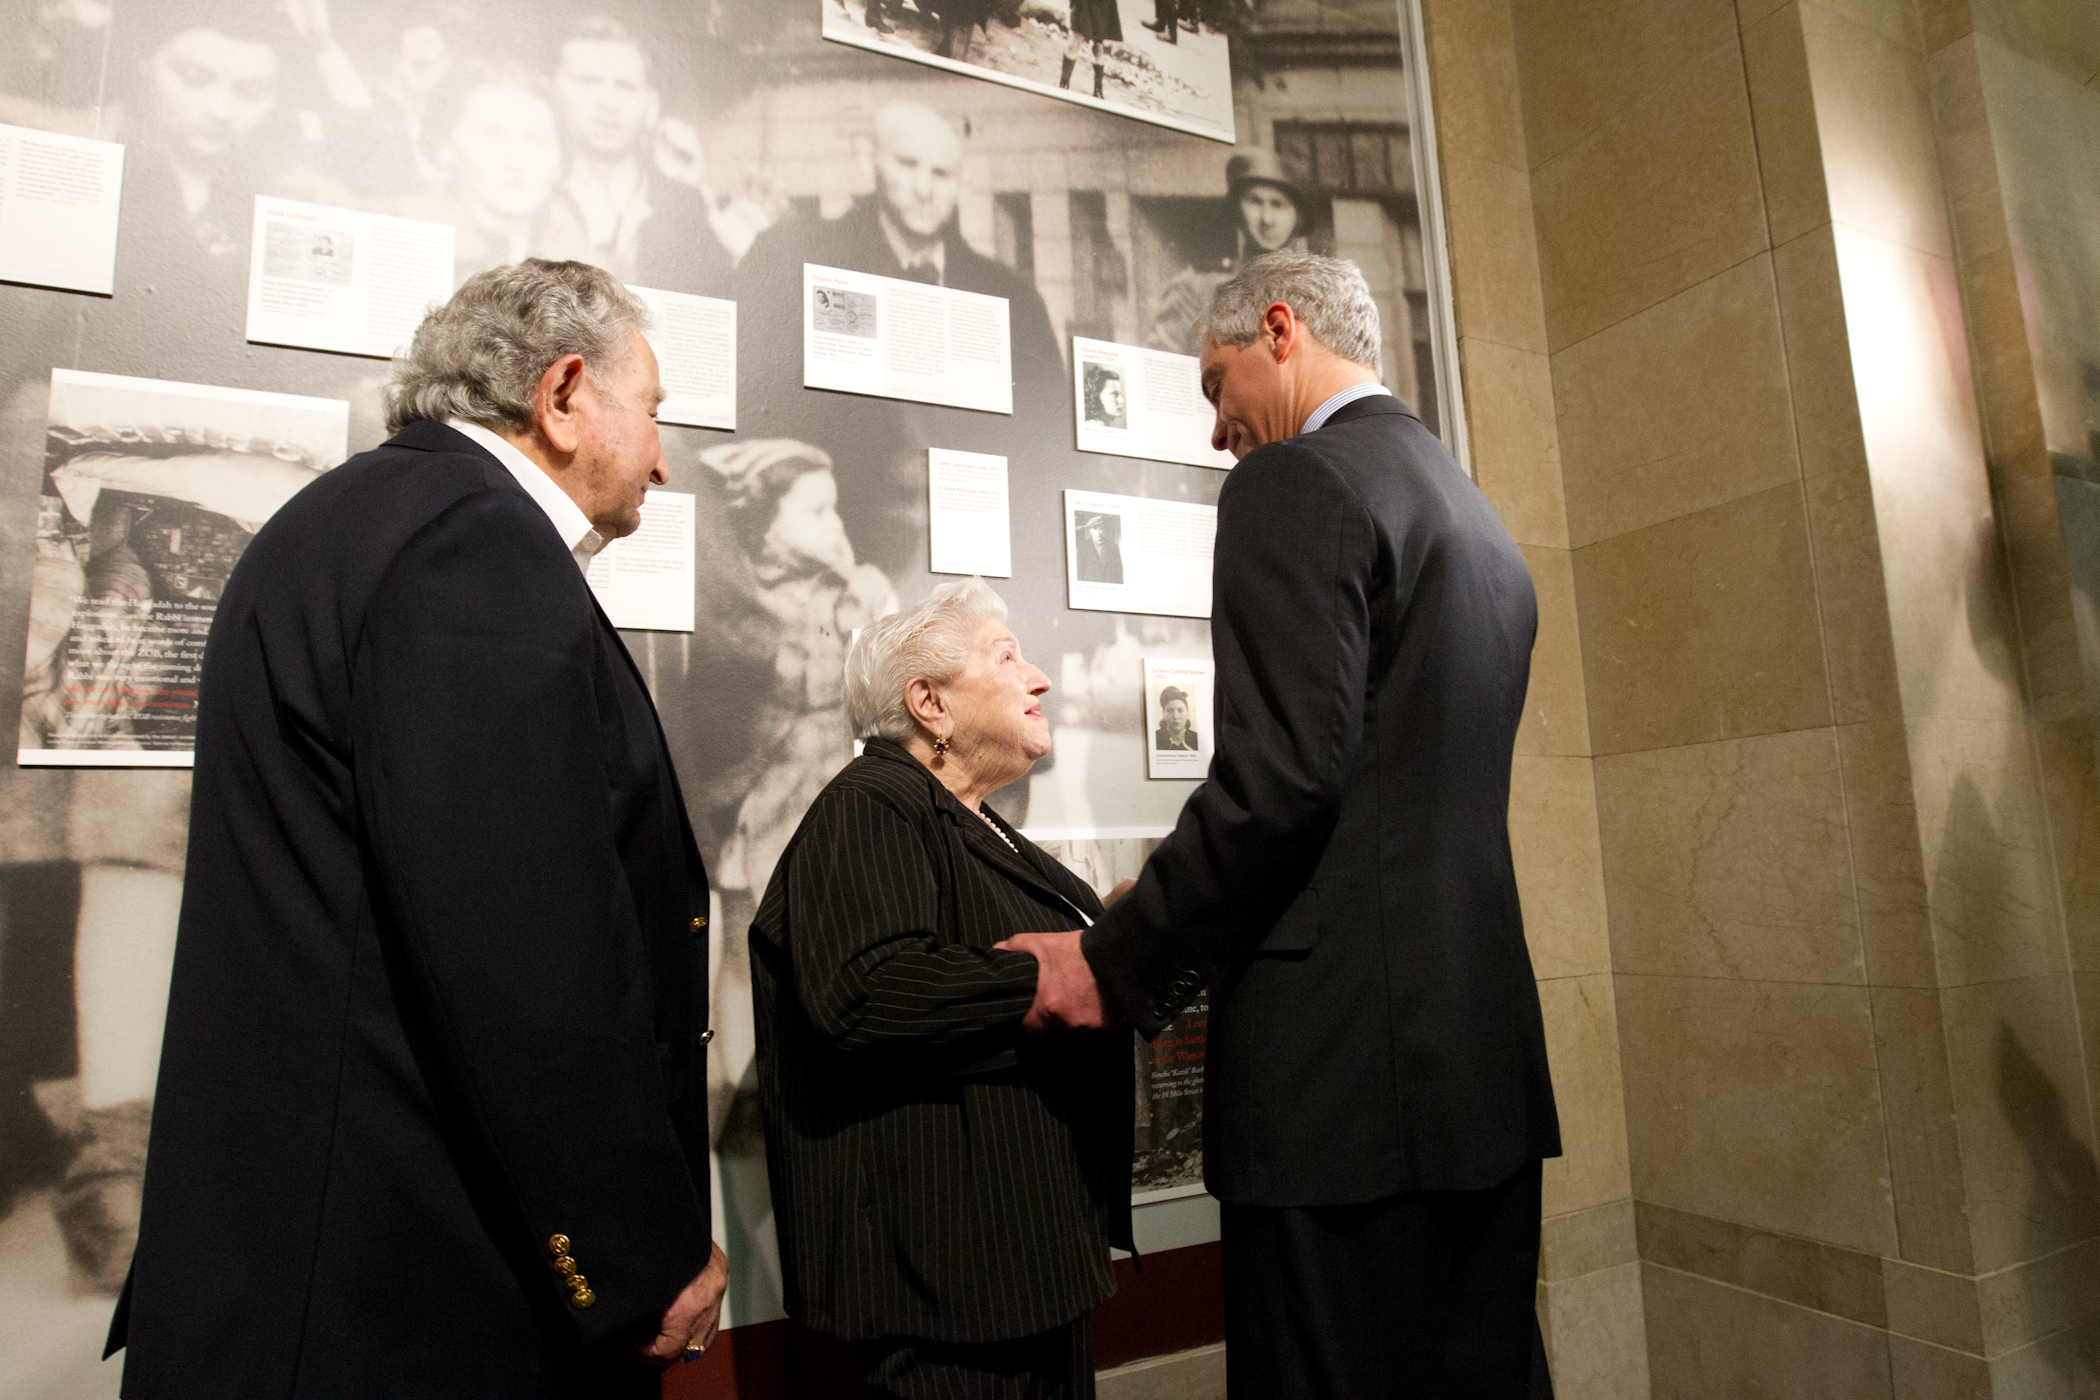 Mayor Emanuel joined by Barbara Steiner and David Figman at the unveiling of the 70th Anniversary of the Warsaw Ghetto Uprising exhibit